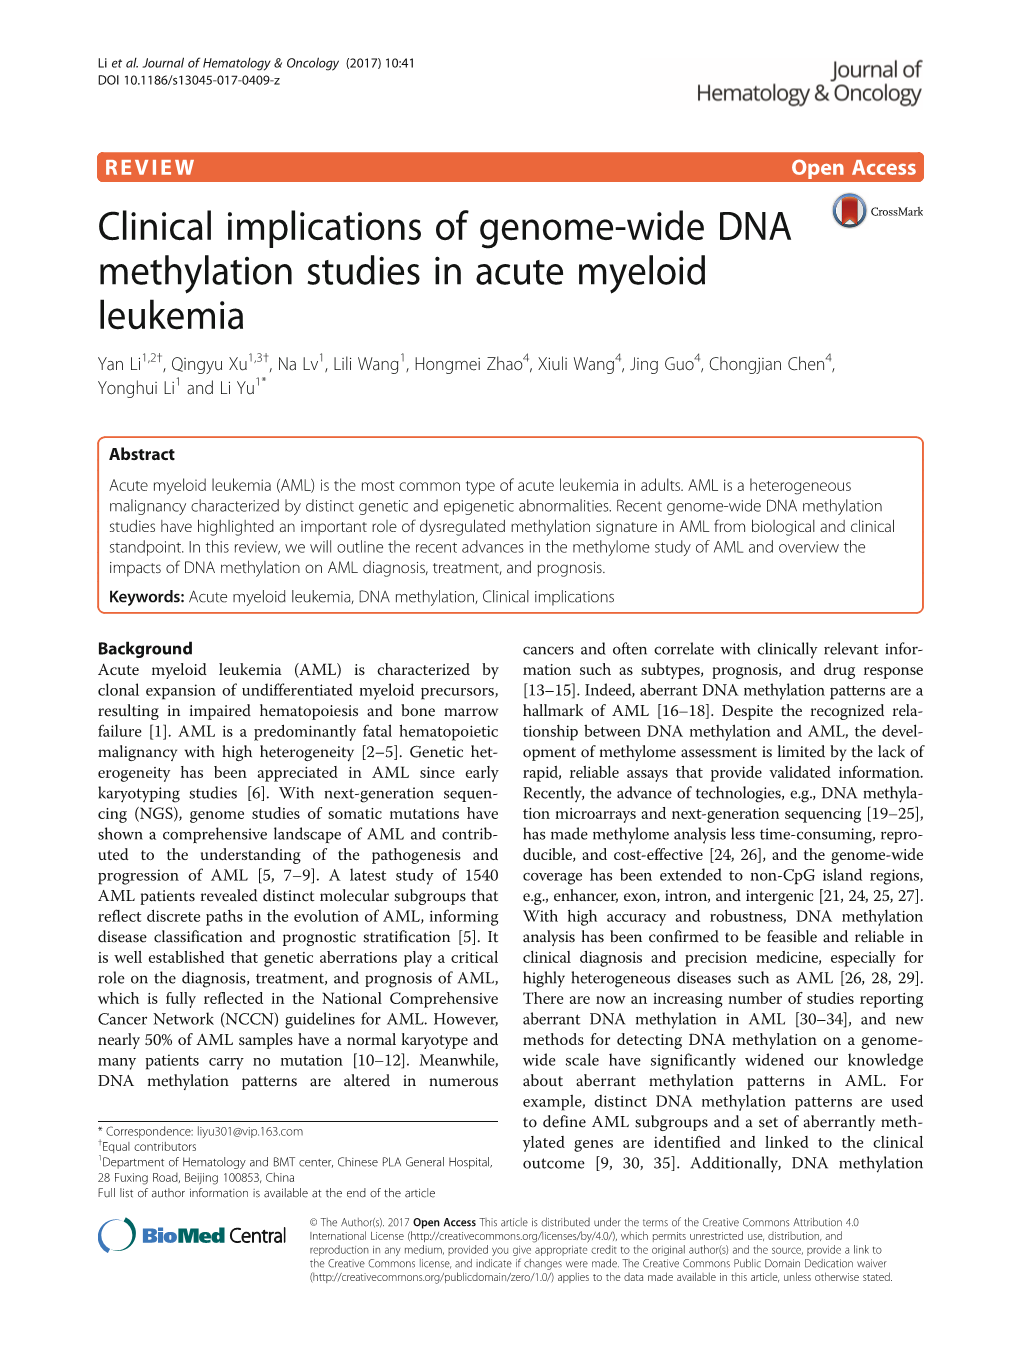 Clinical Implications of Genome-Wide DNA Methylation Studies in Acute